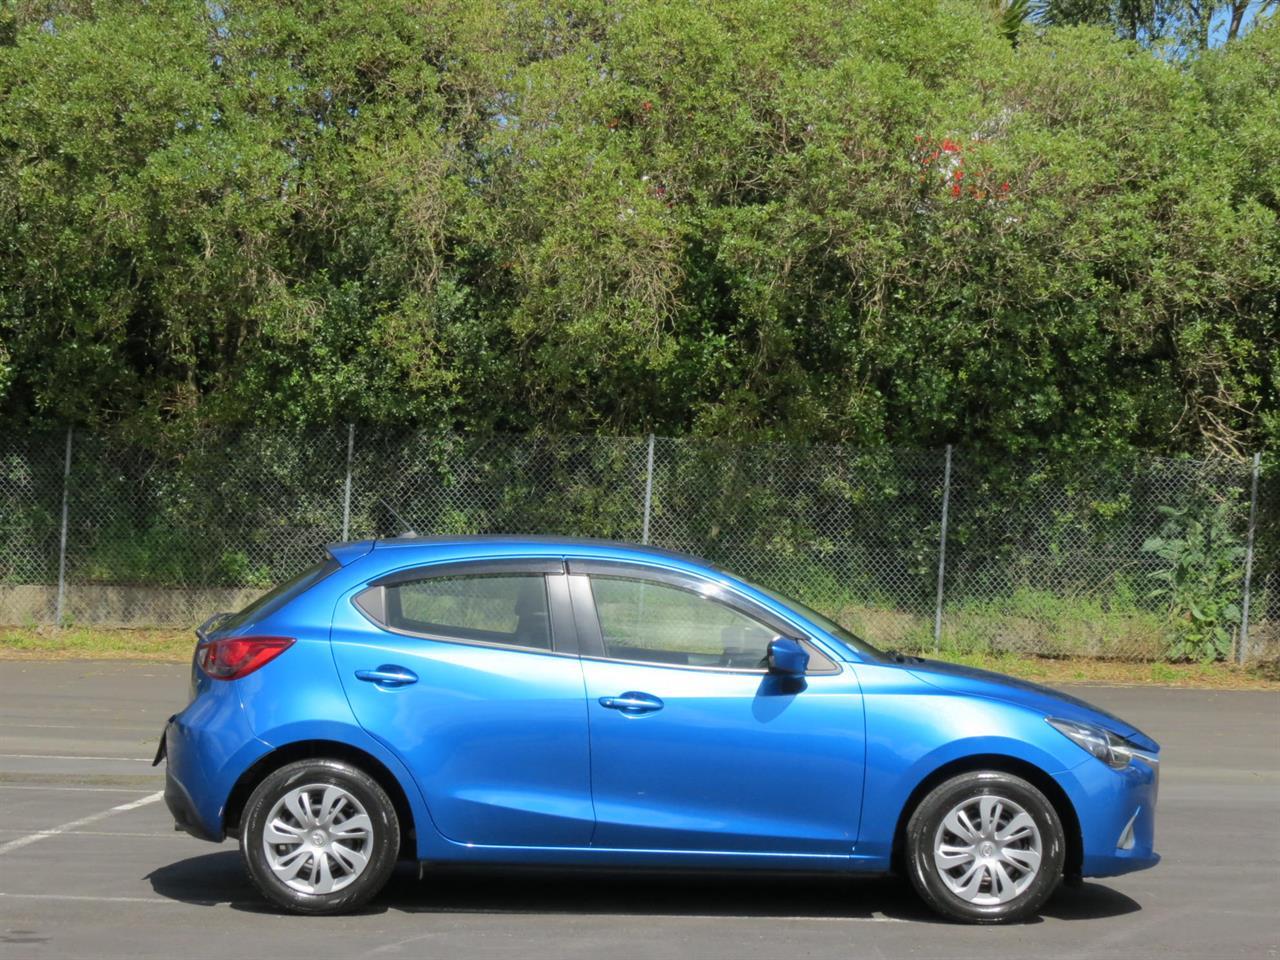 2015 Mazda Demio only $39 weekly